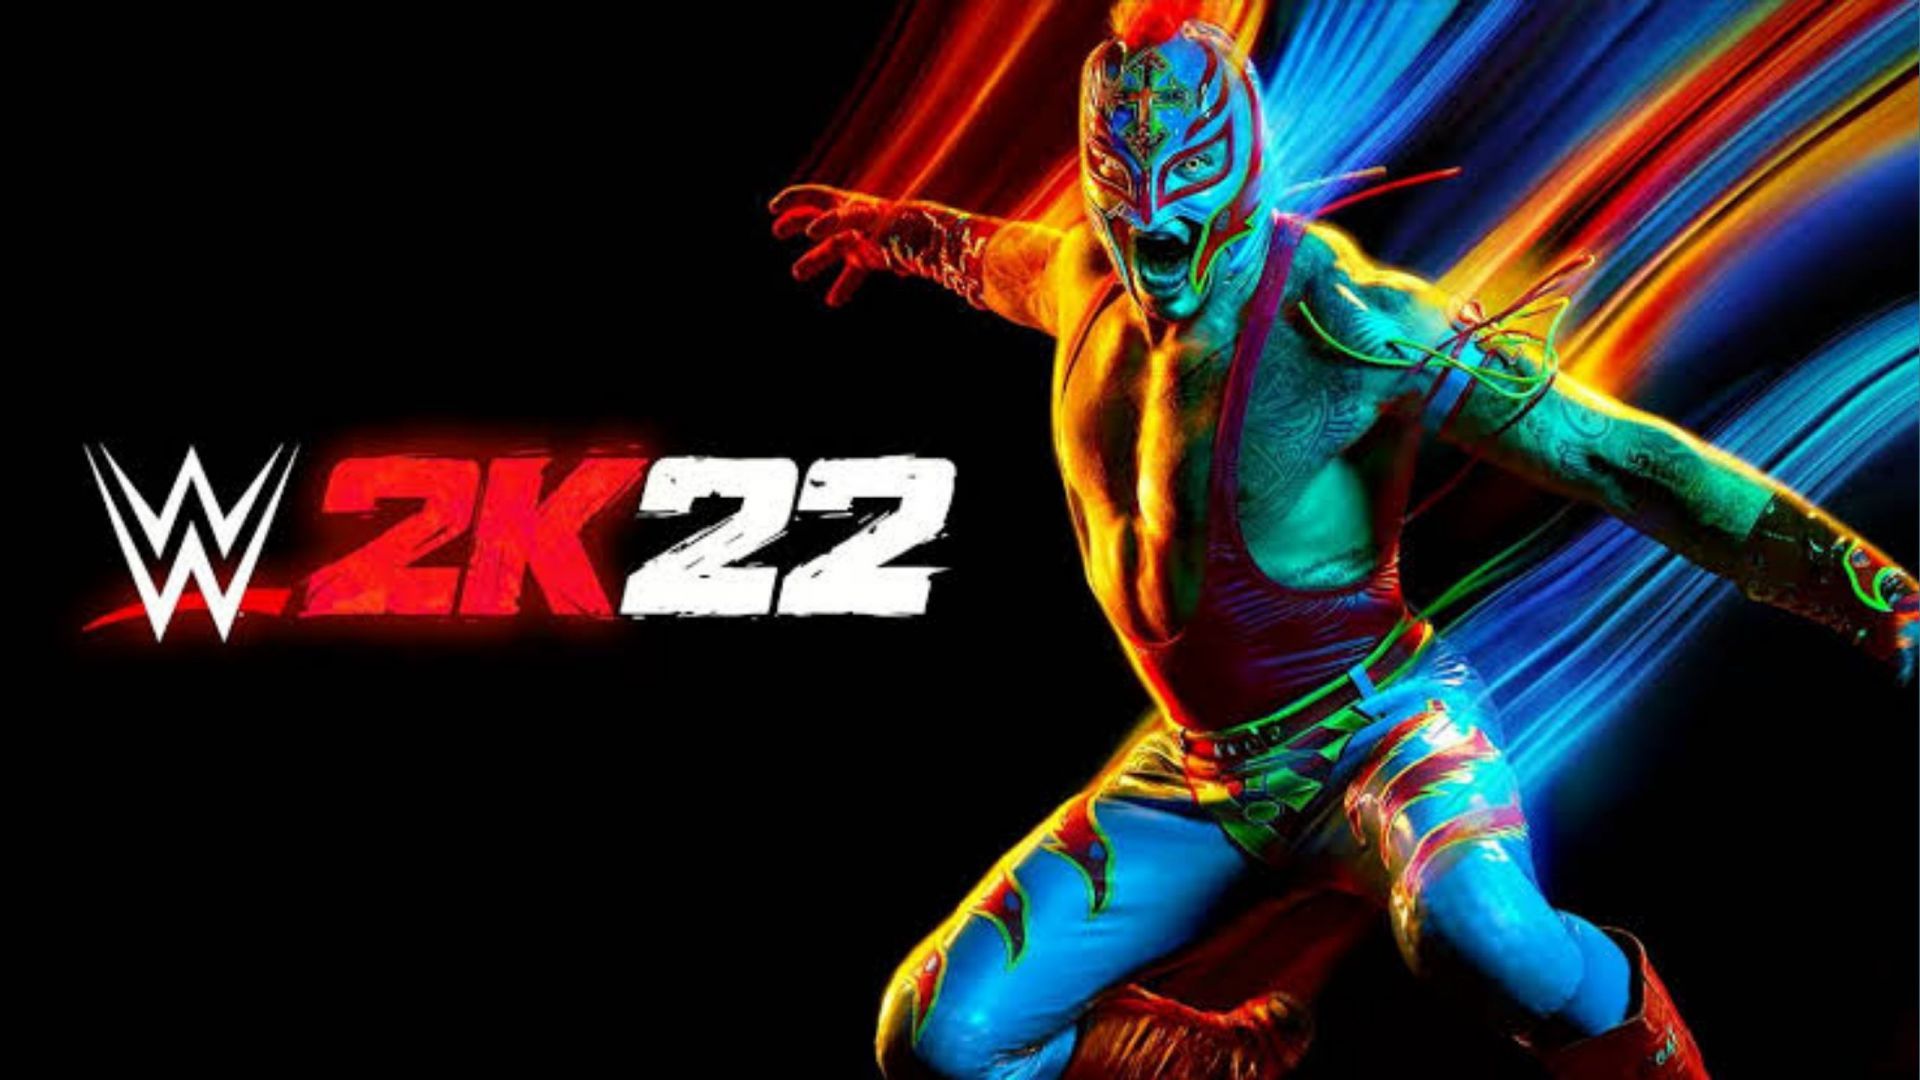 WWE 2K22 cover featuring Rey Mysterio.